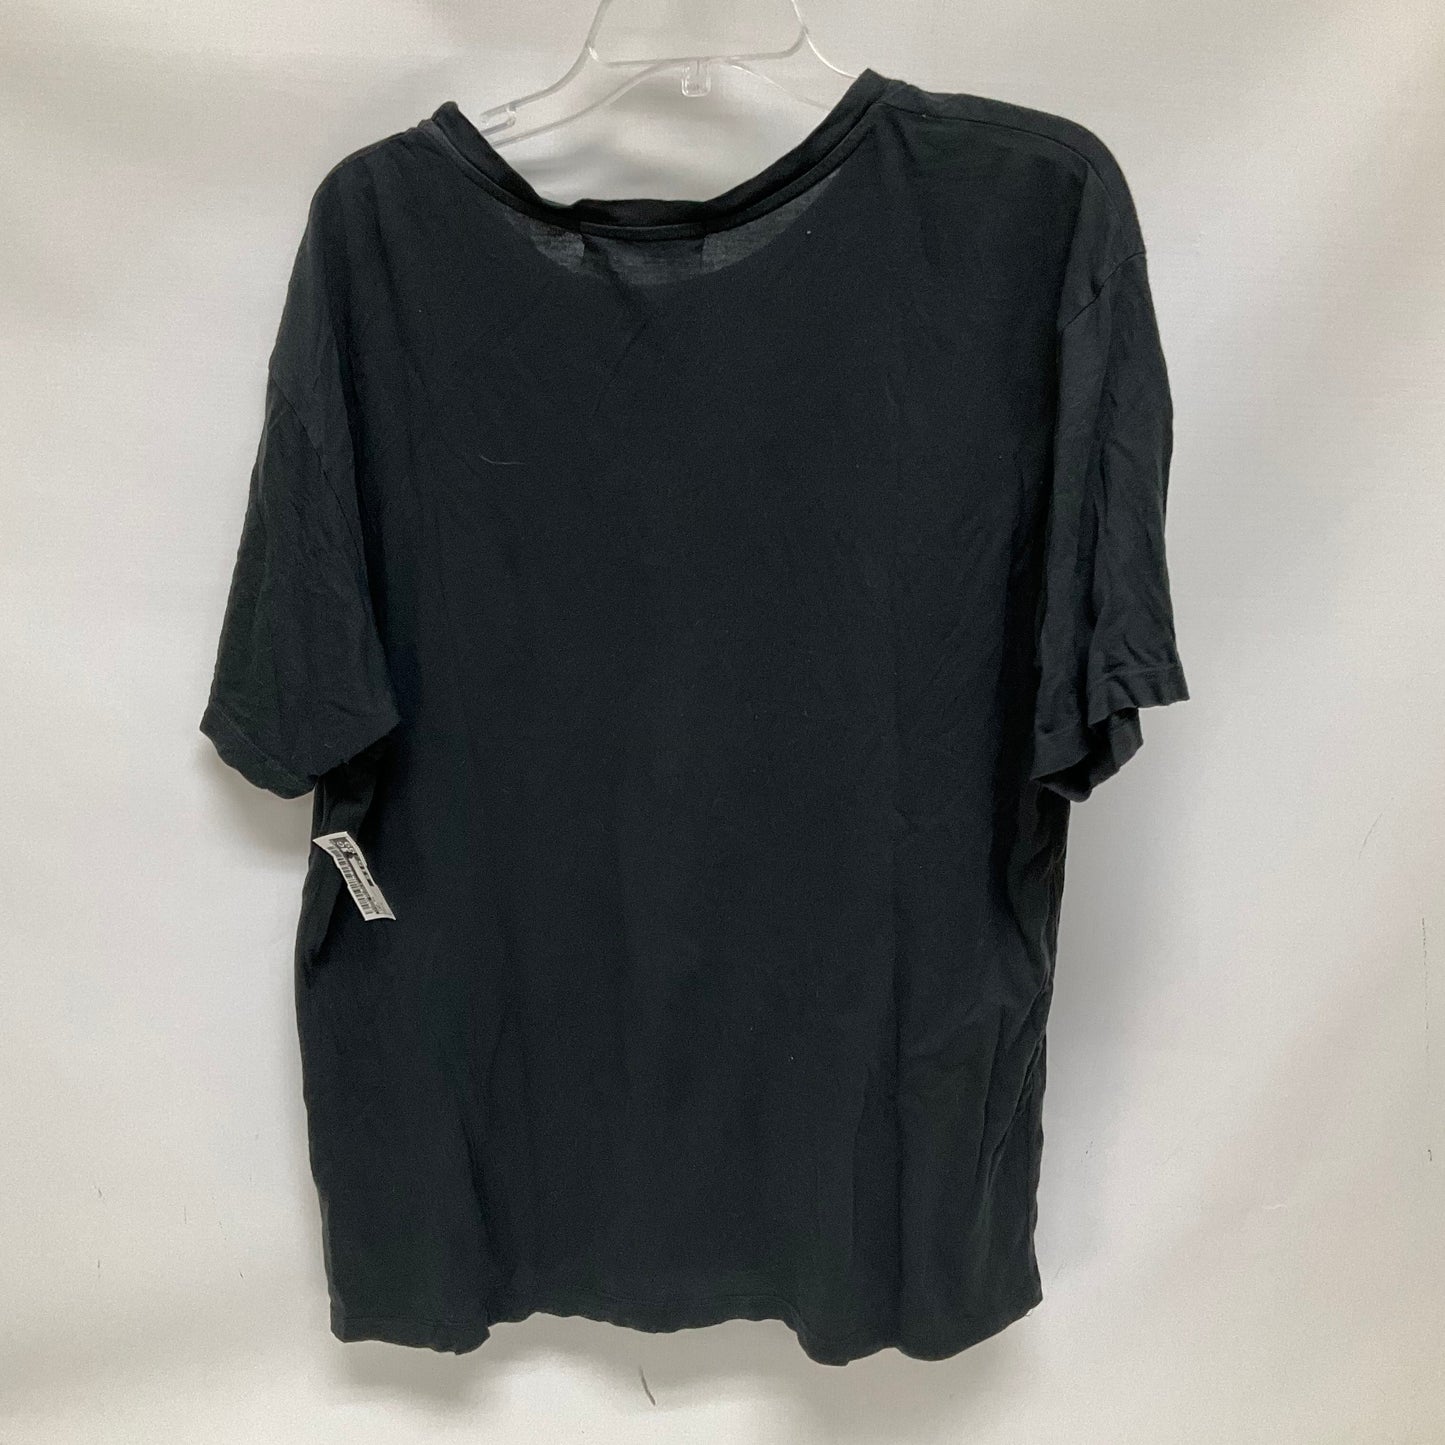 Grey Top Short Sleeve Free People, Size L